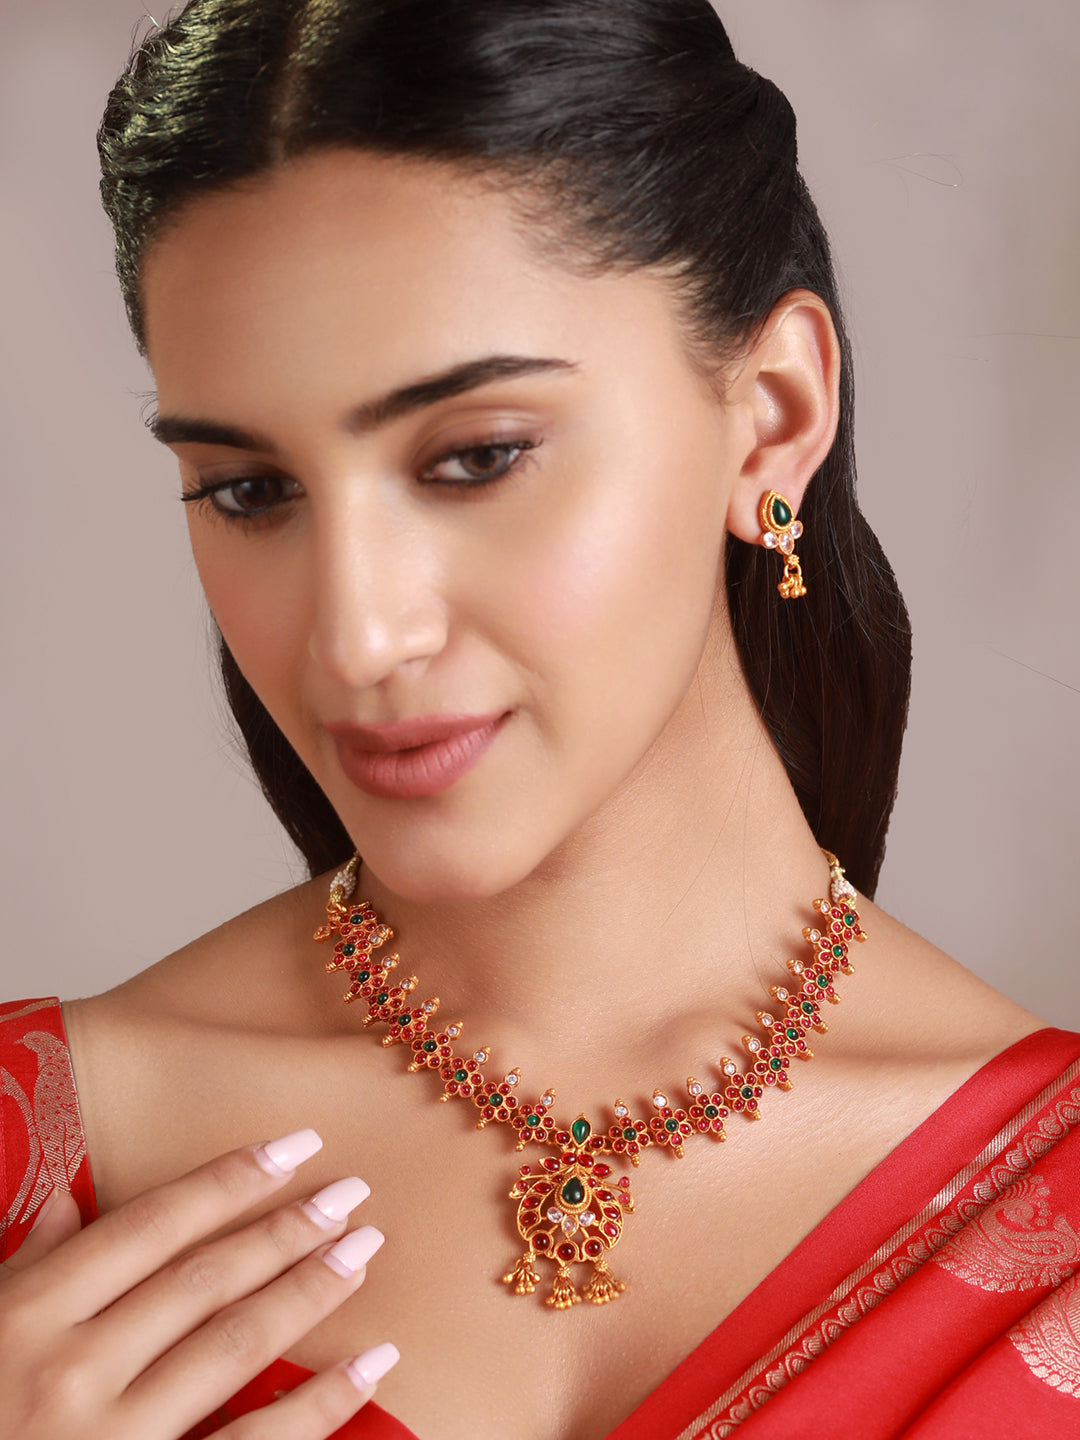 Priyaasi Floral Multicolor Kemp Stone Gold-Plated Jewellery Set